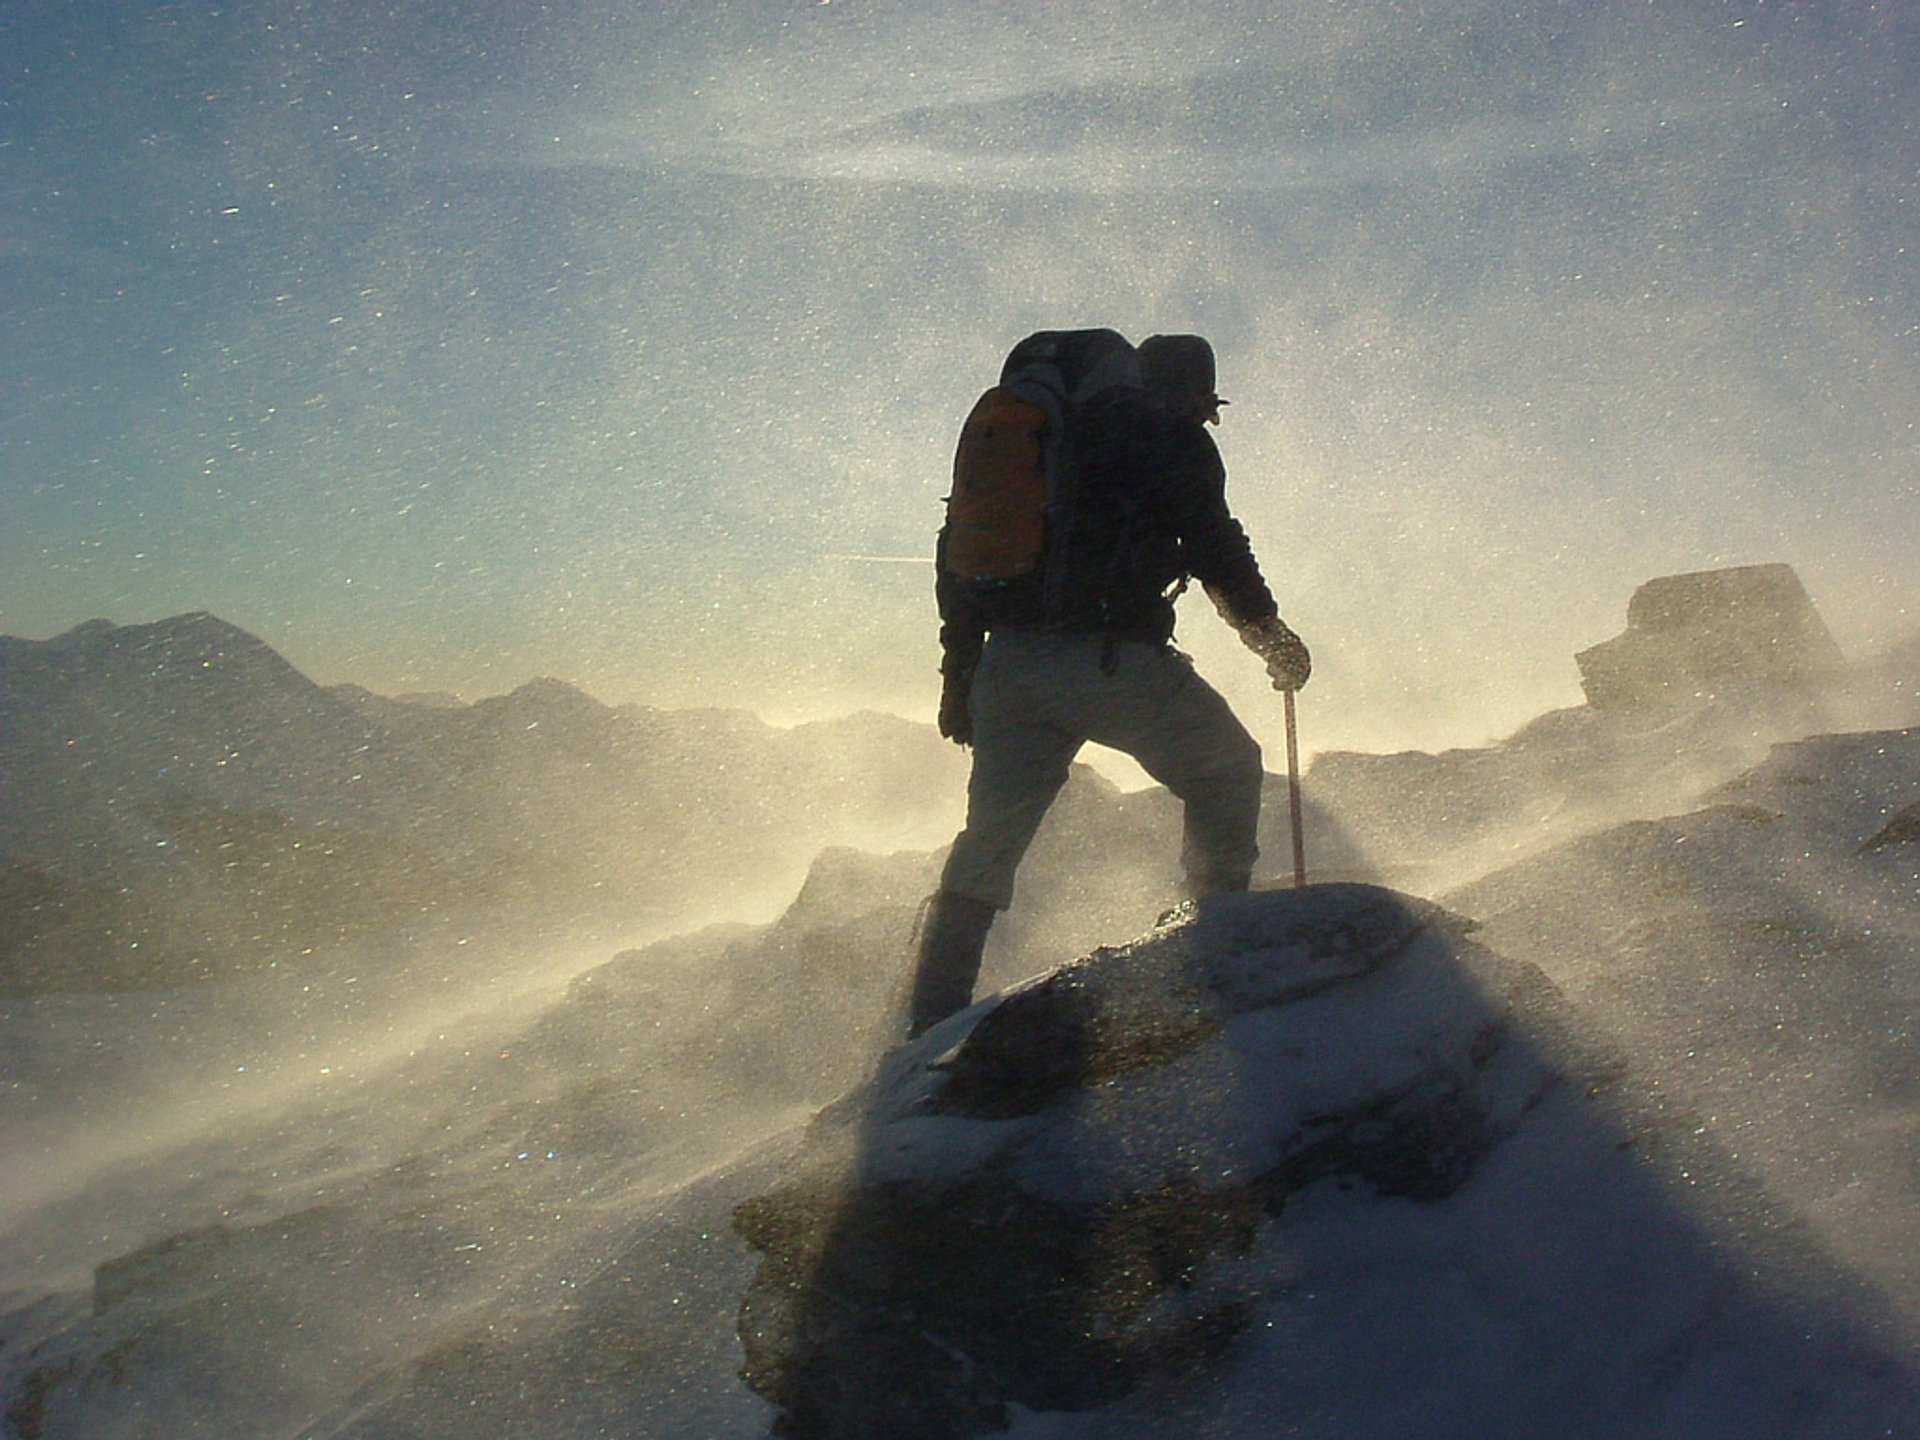 Winter Mountaineering and Ice Climbing